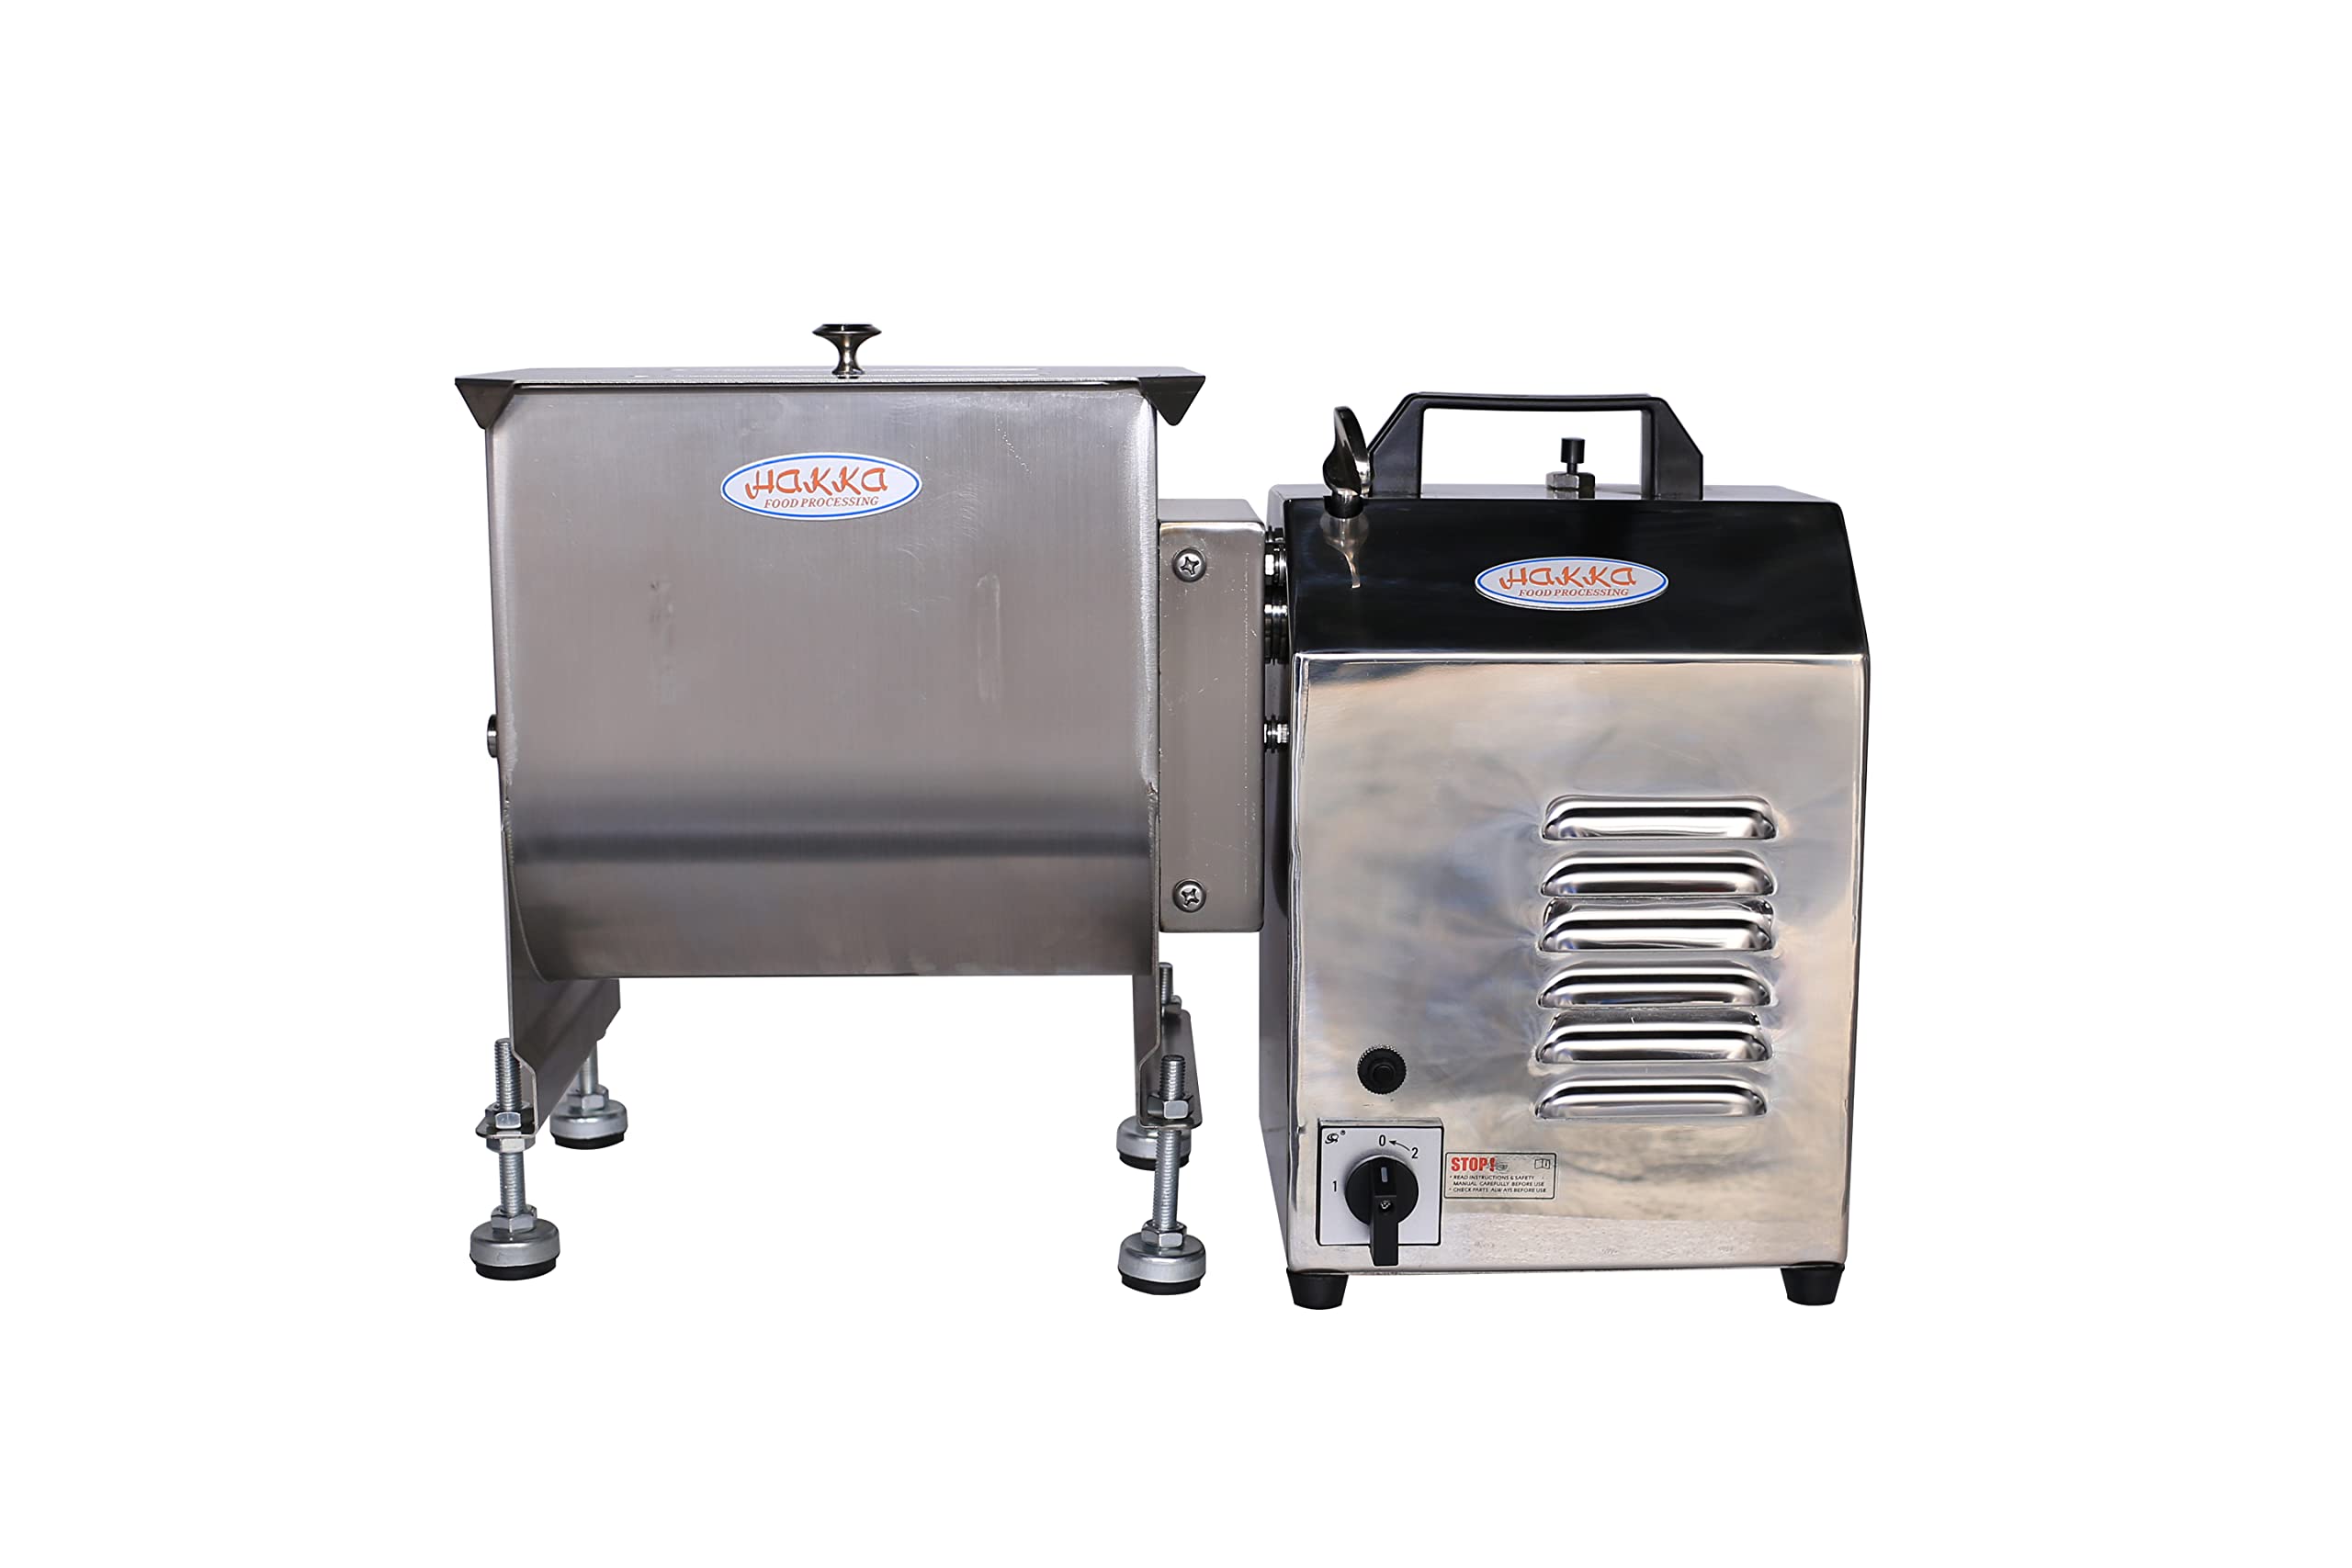 Hakka® Electric 10-Pound capacity Tank Stainless Steel Manual Meat Mixer  (Mixing Maximum 15-Pound for Meat)